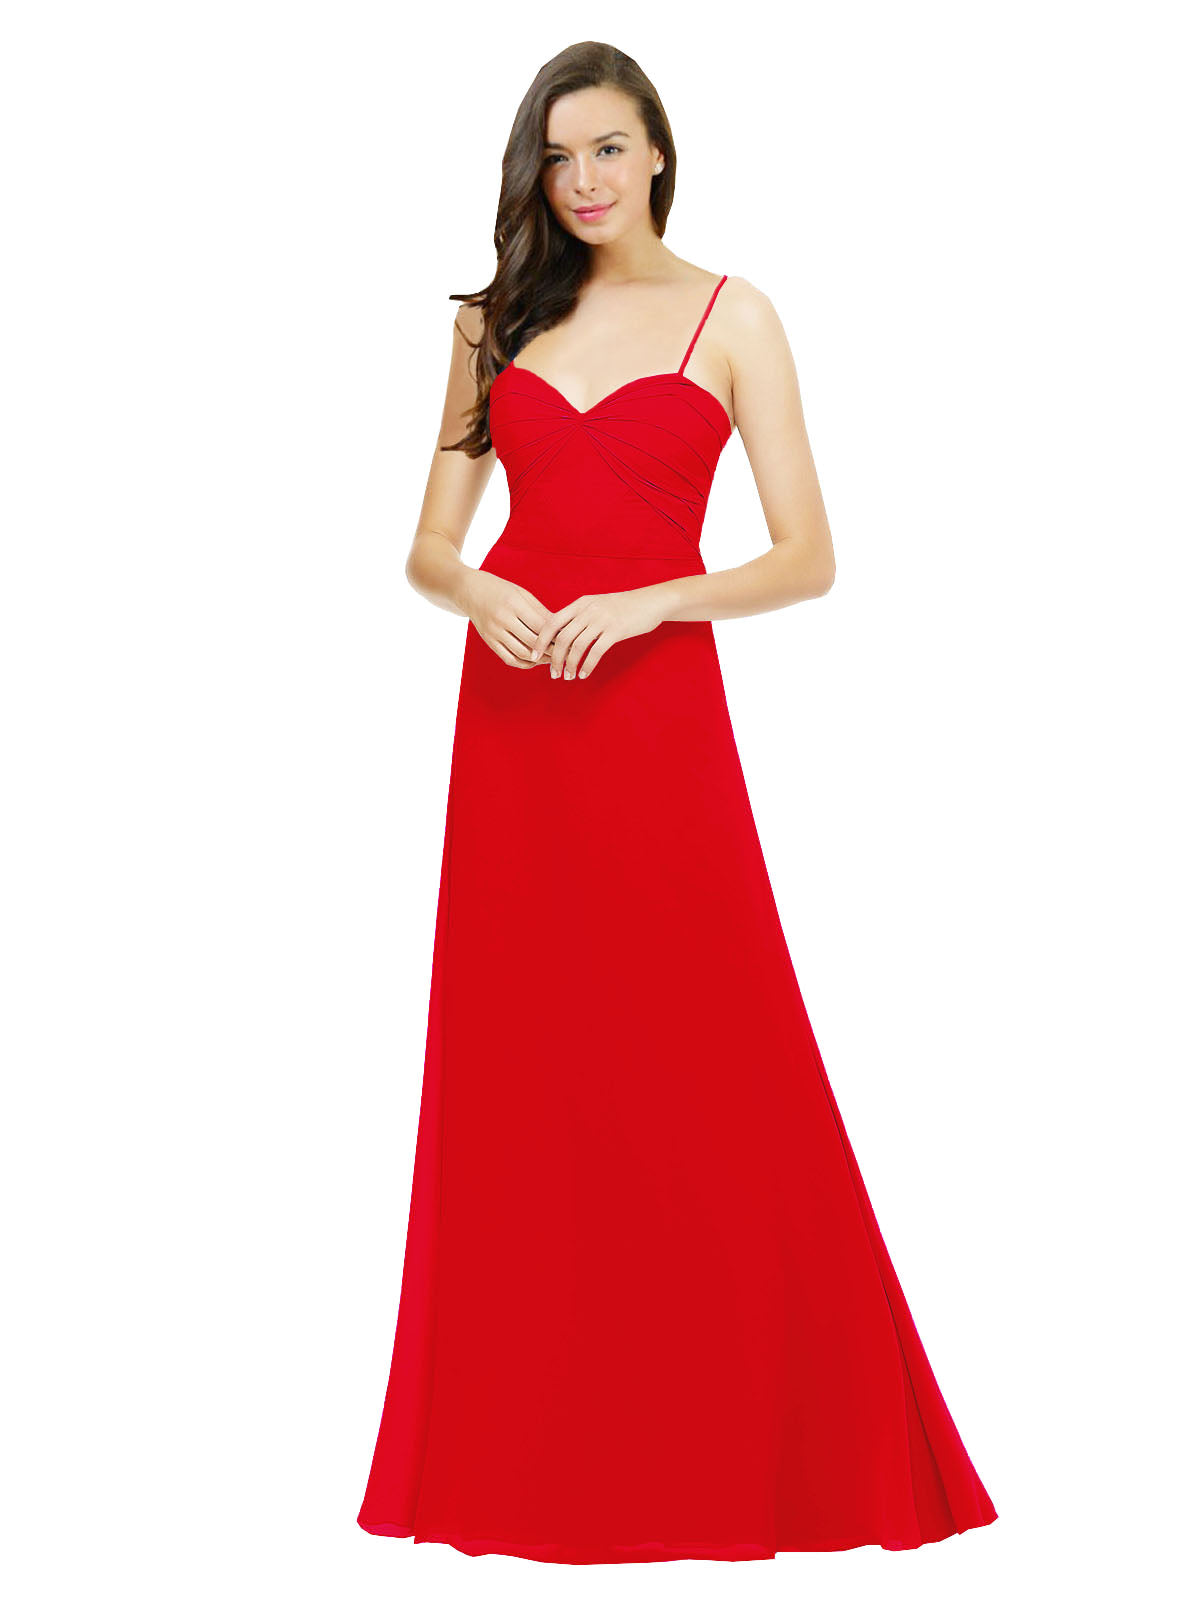 Red A-Line Spaghetti Straps Sweetheart Sleeveless Long Bridesmaid Dress Valarie